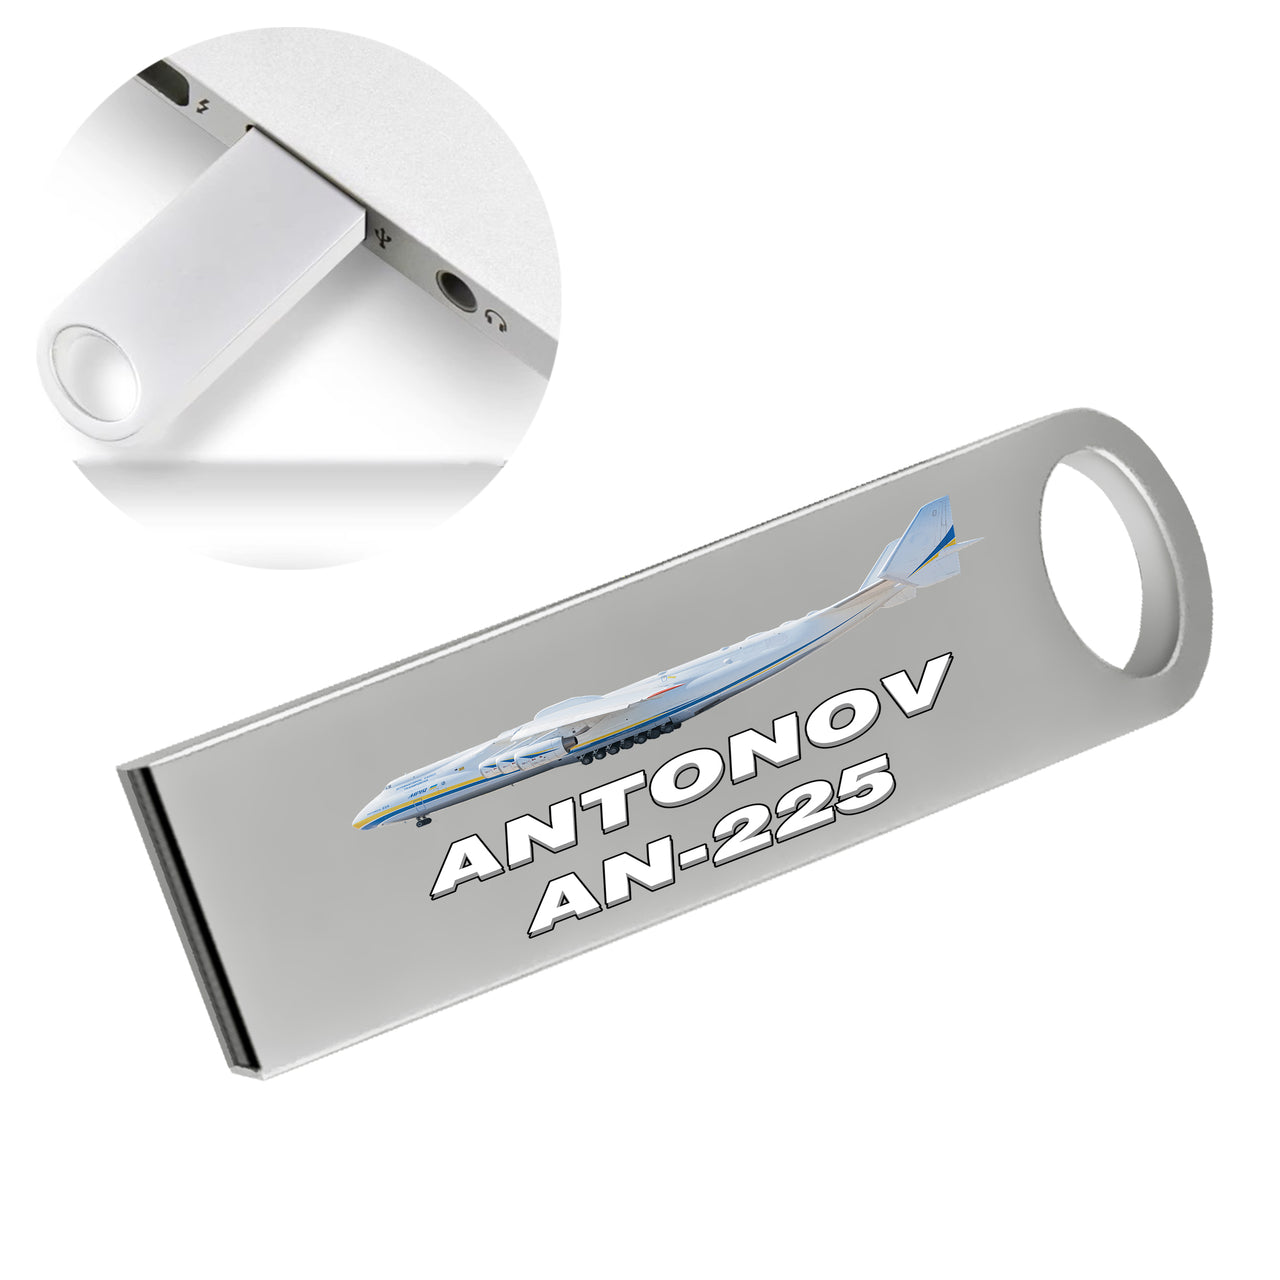 The Antonov AN-225 Designed Waterproof USB Devices